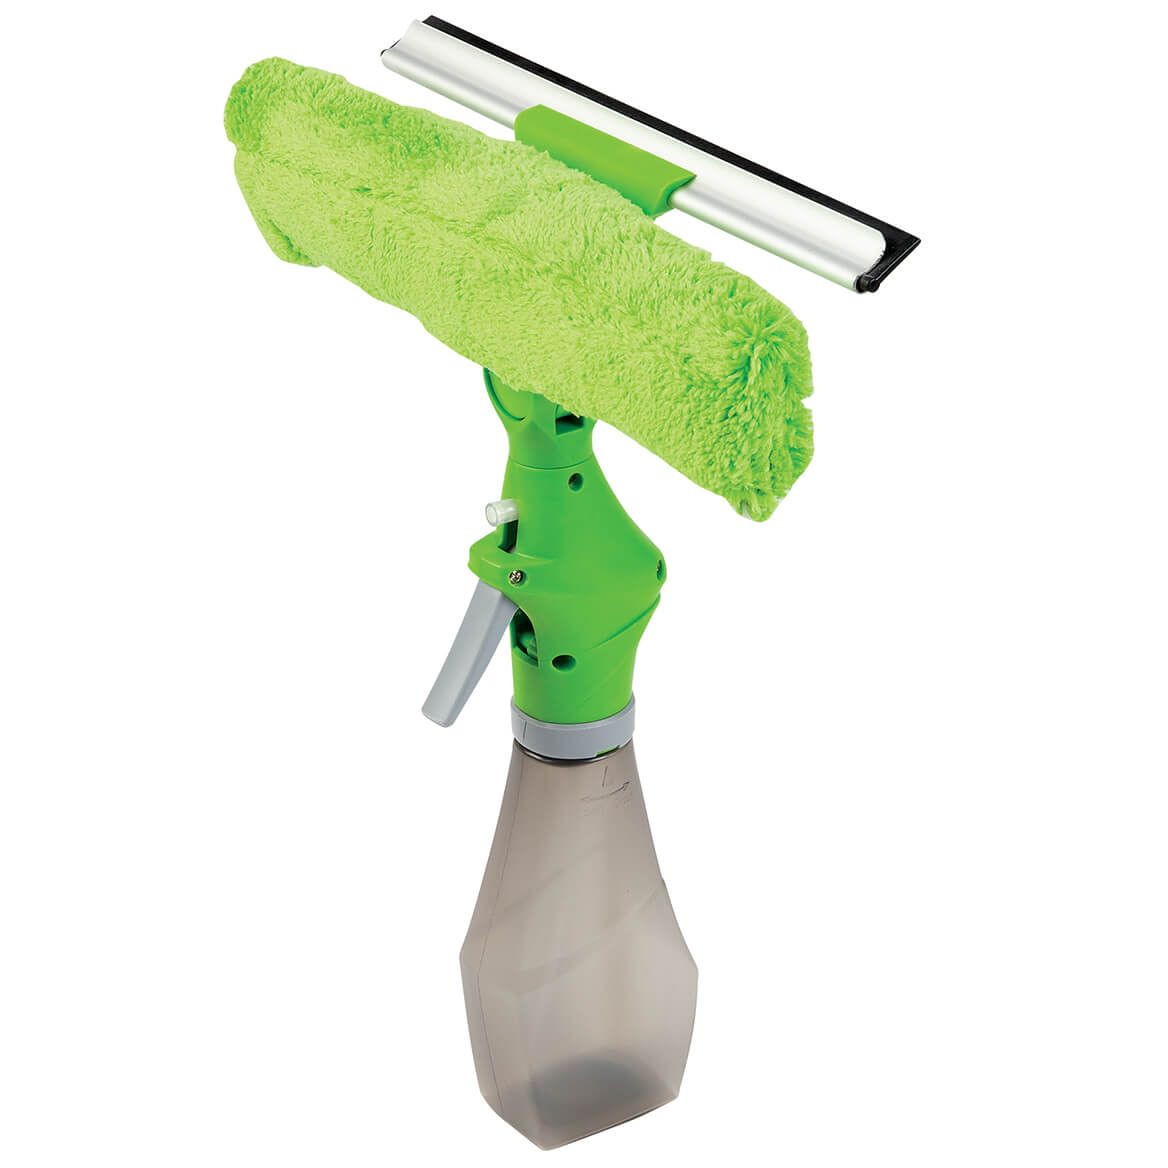 3 in 1 Window Squeegee Washer Cleaner With Spray Bottle + '-' + 376246